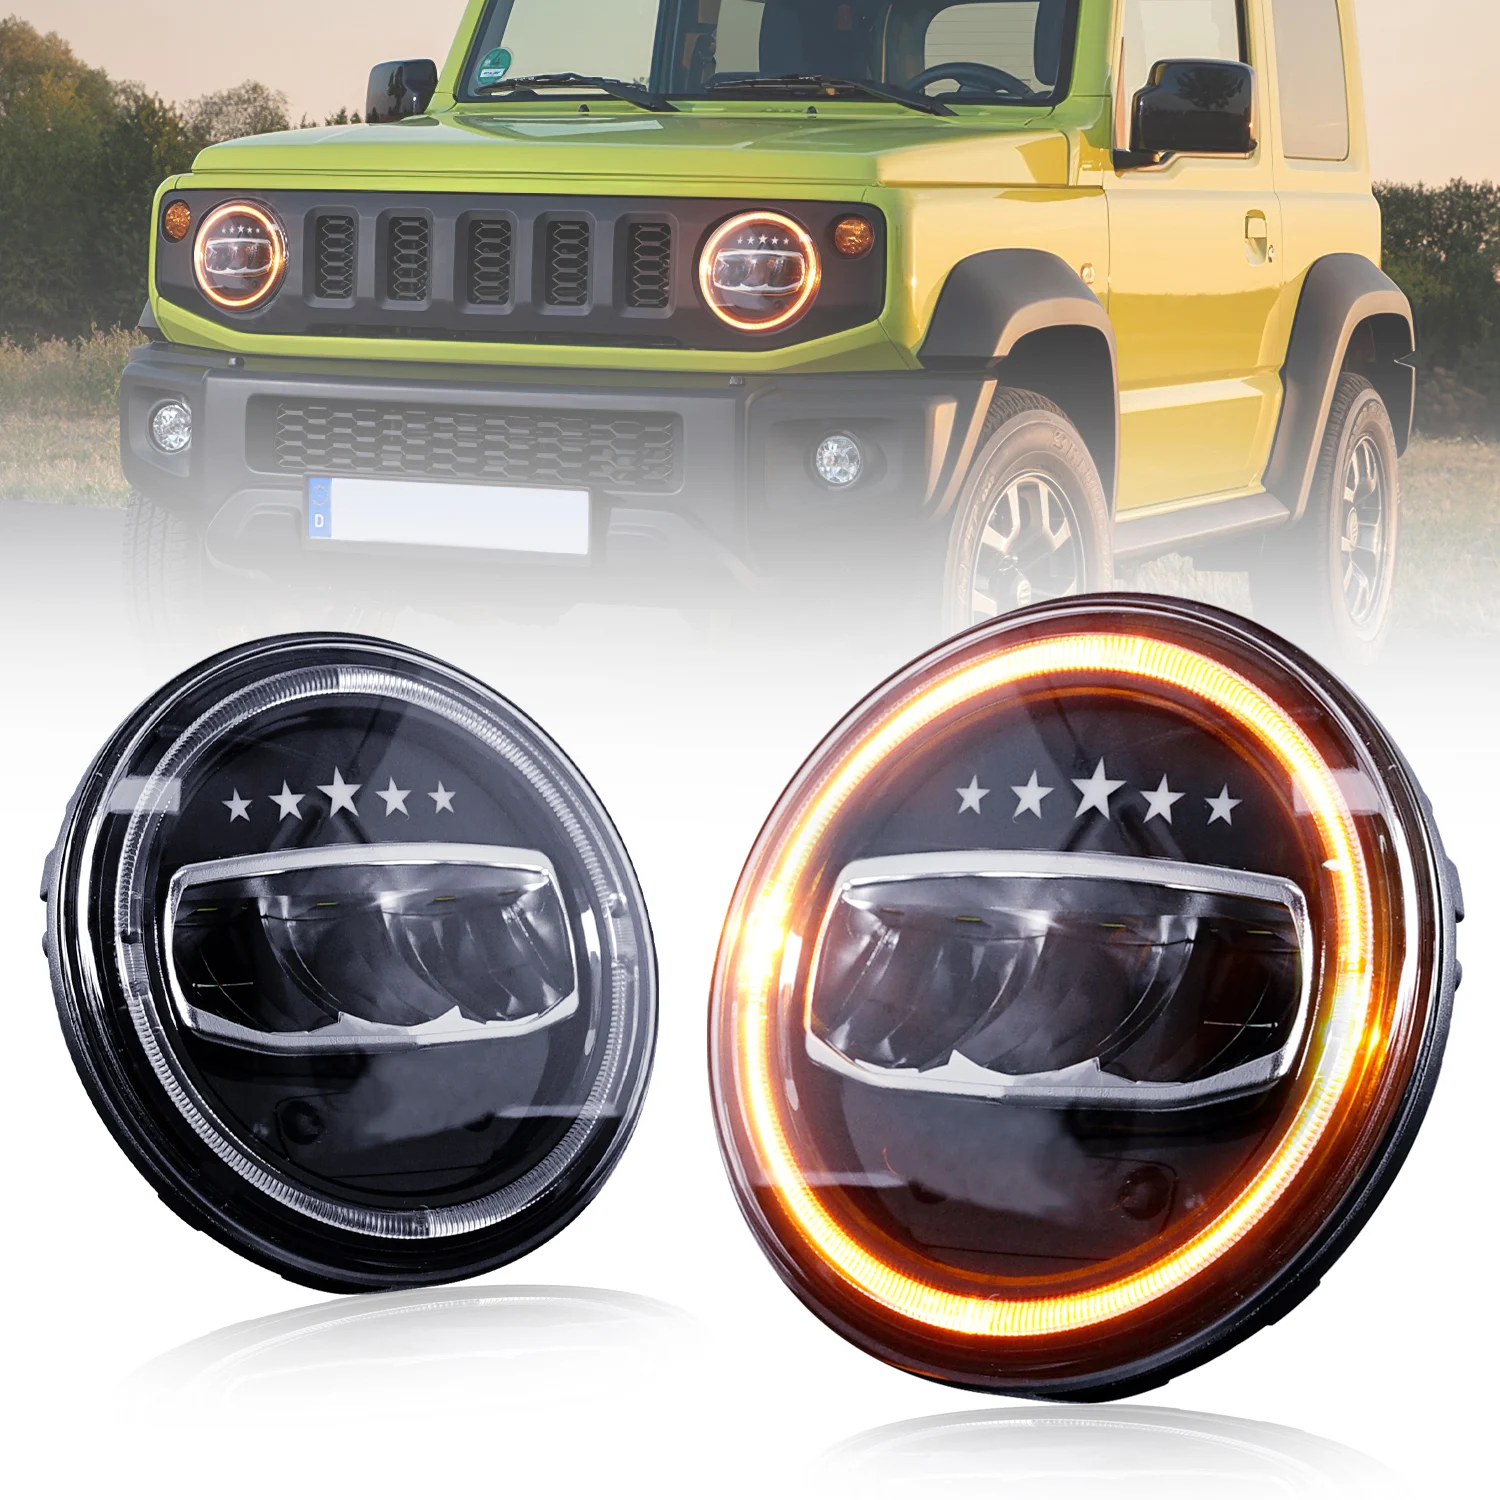 

LED Headlight for Wrangler 7"80W Round with Halo DRL High Low Beam for Wrangler JK TJ LJ with H4 H13 Adapter-2 Pack Blue Star